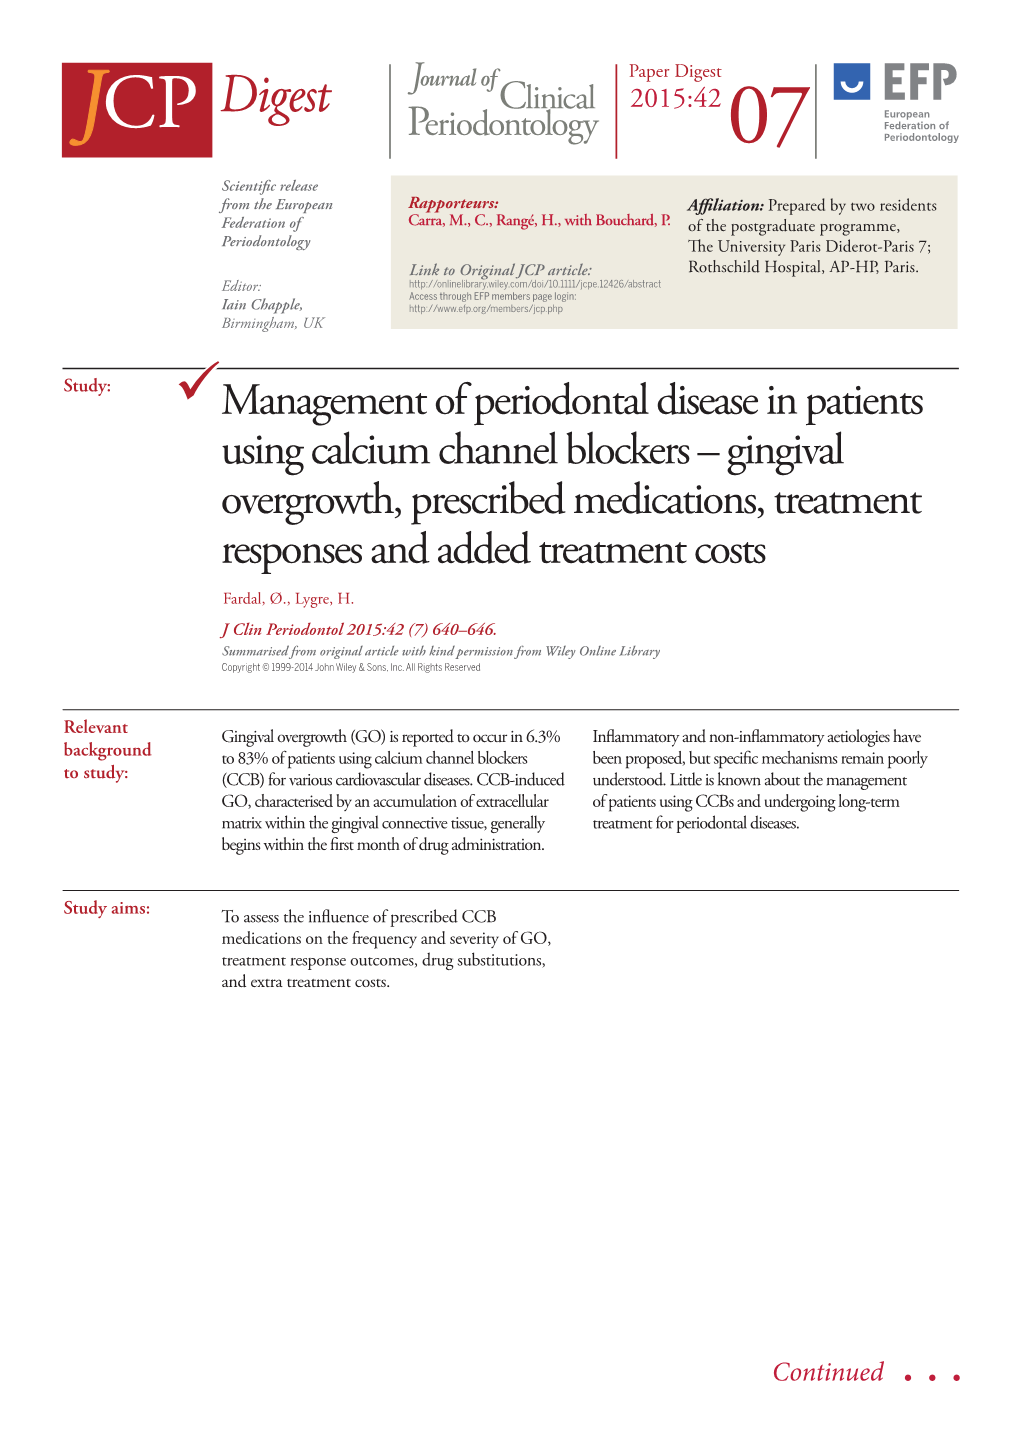 Management of Periodontal Disease in Patients Using Calcium Channel